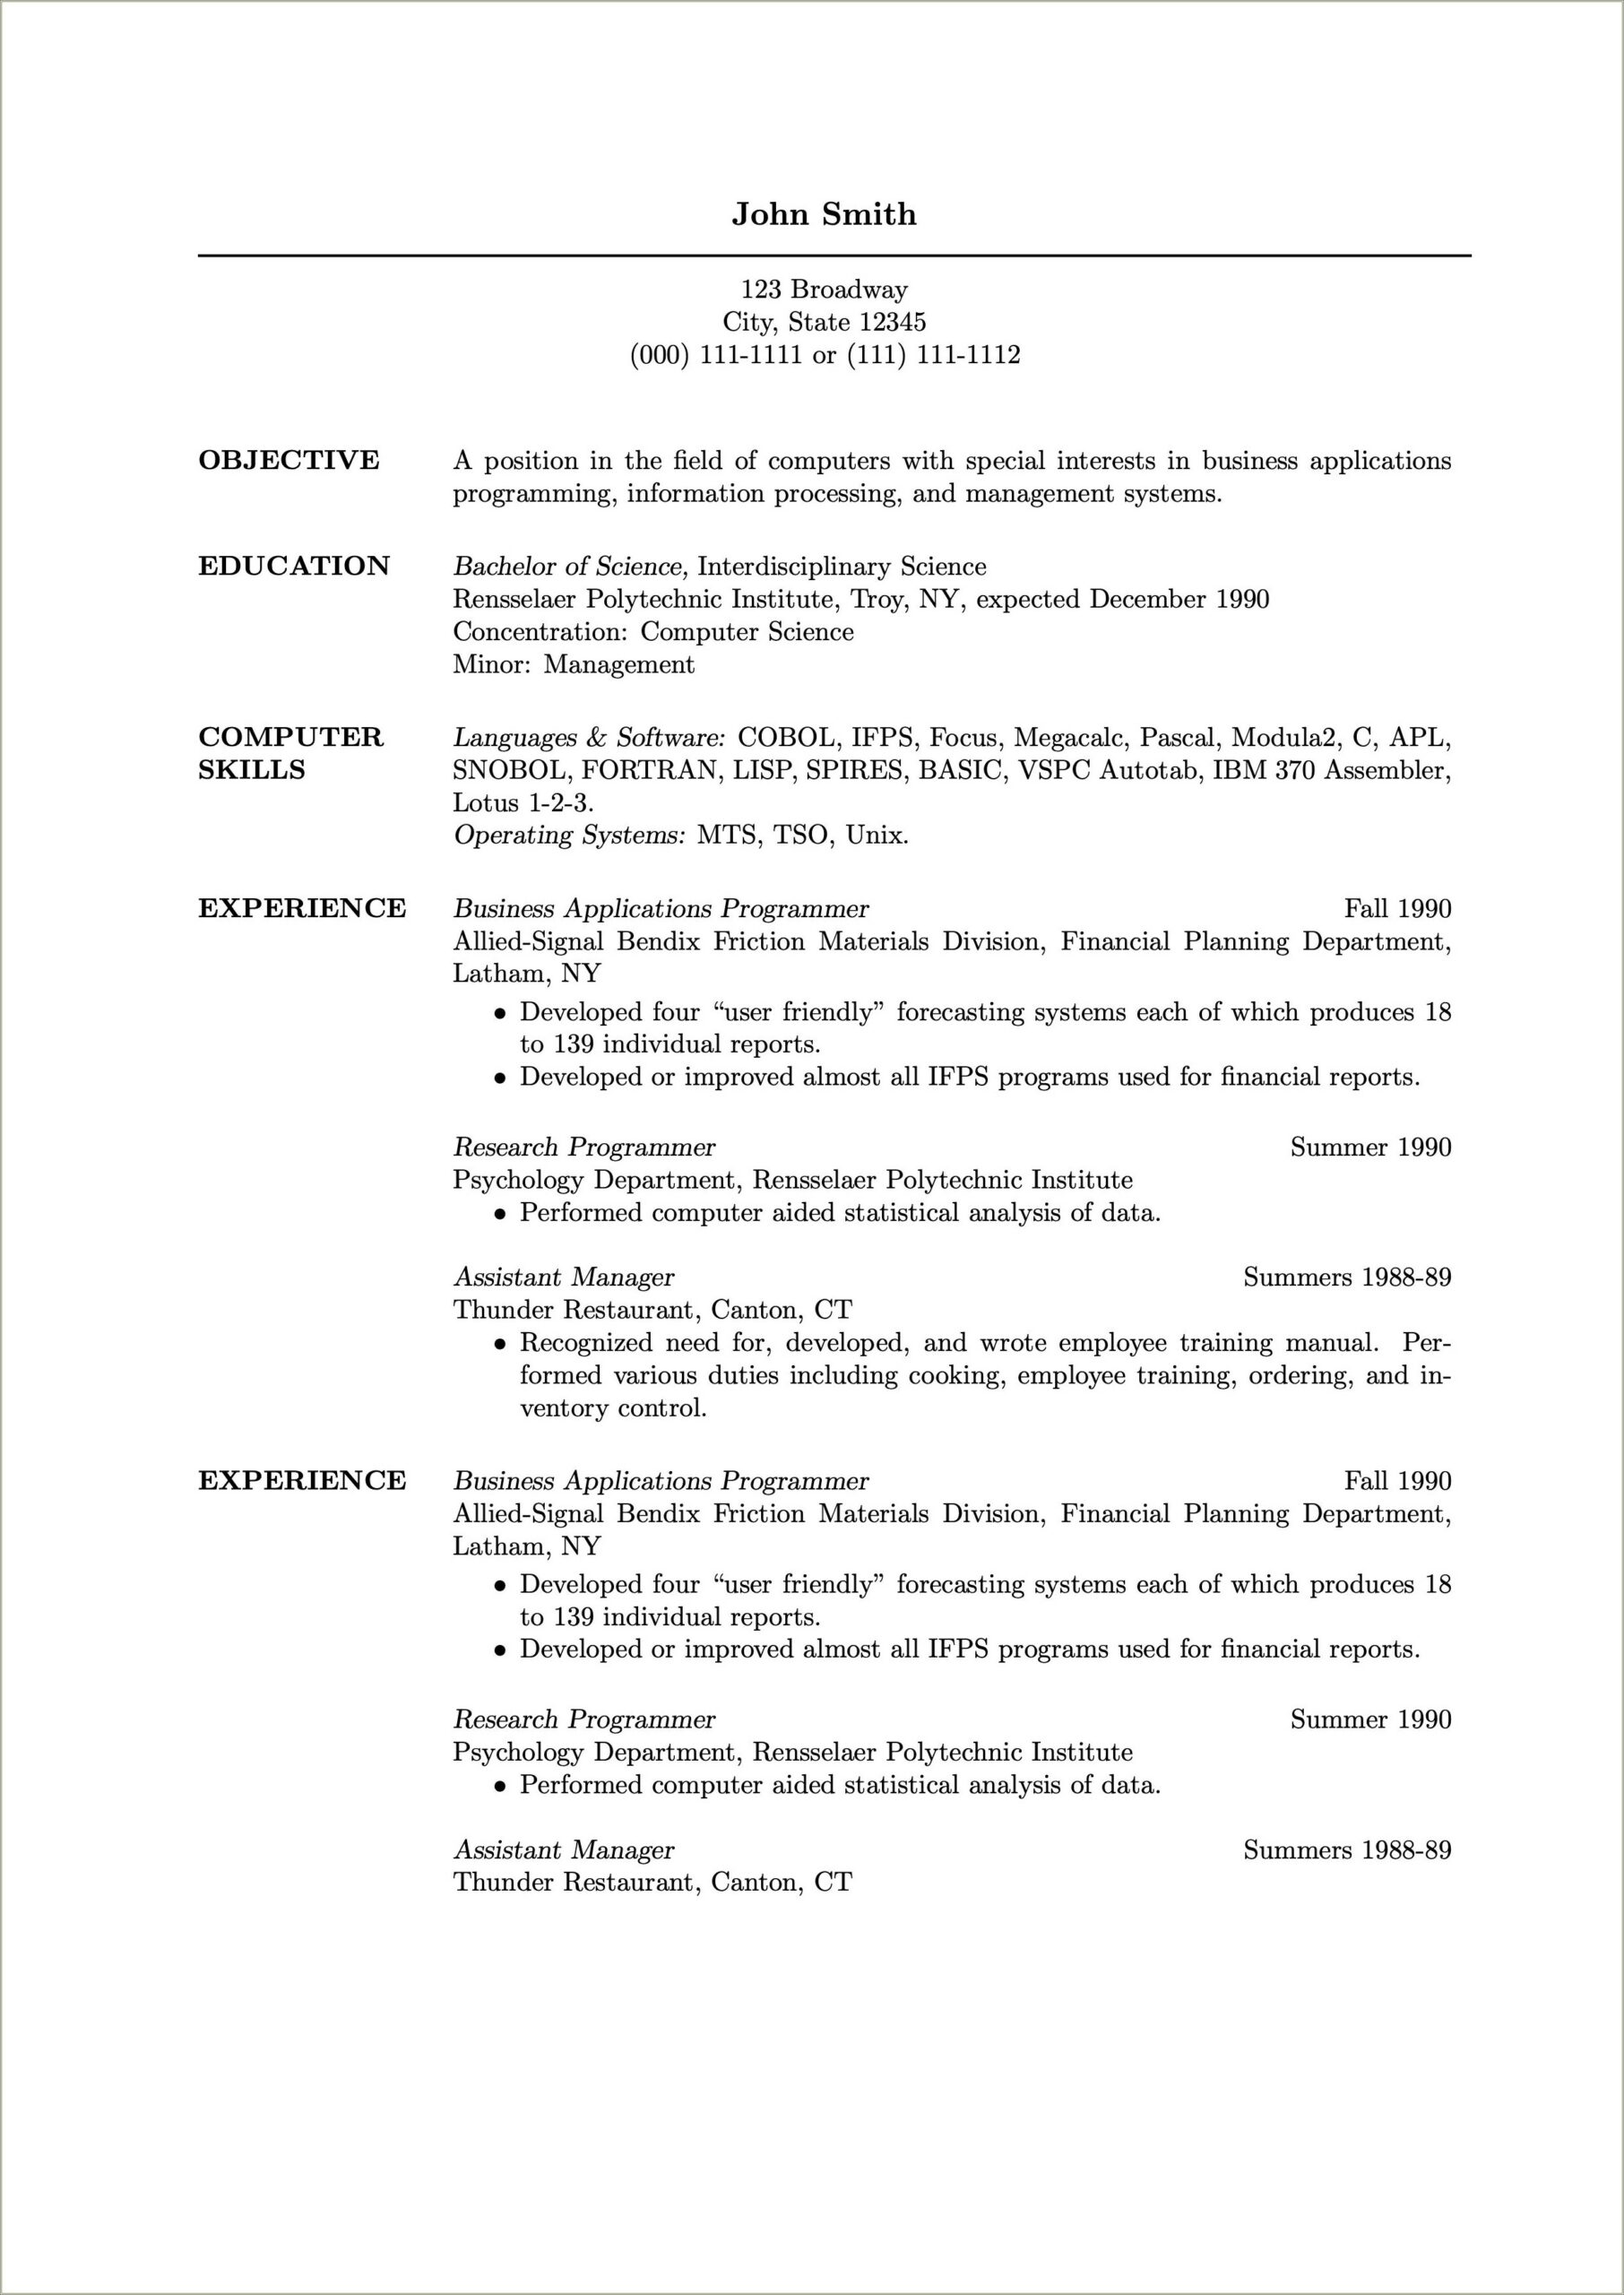 Primary And Secondary Skills Category On Resume